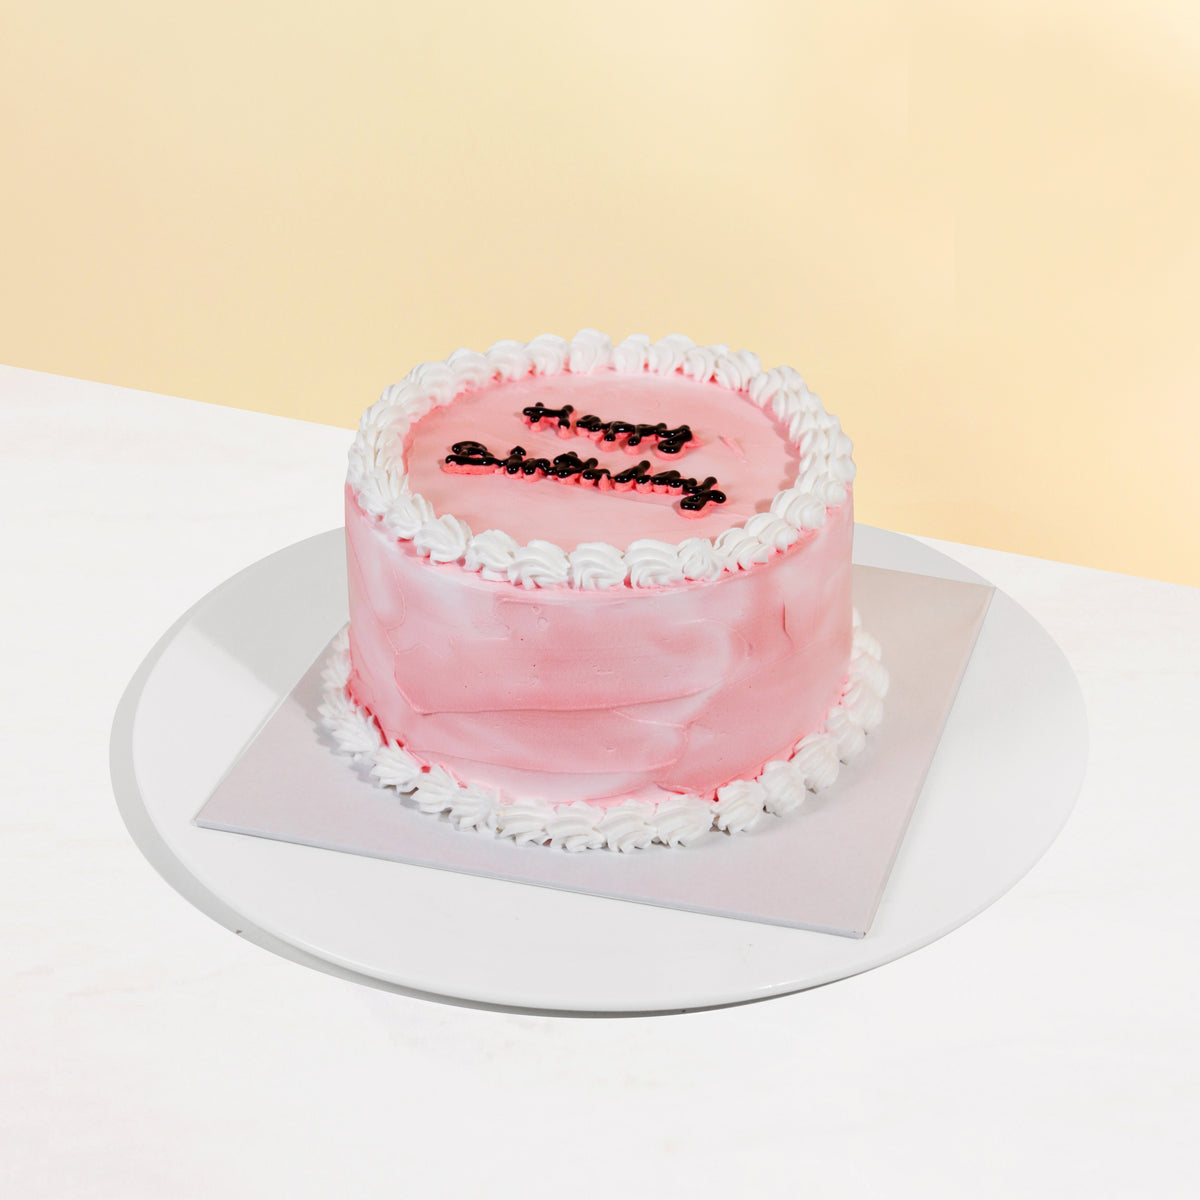 PINK APRON CAKES - 239 Photos & 24 Reviews - 7430 Stewart And Gray Rd,  Downey, California - Desserts - Phone Number - Yelp